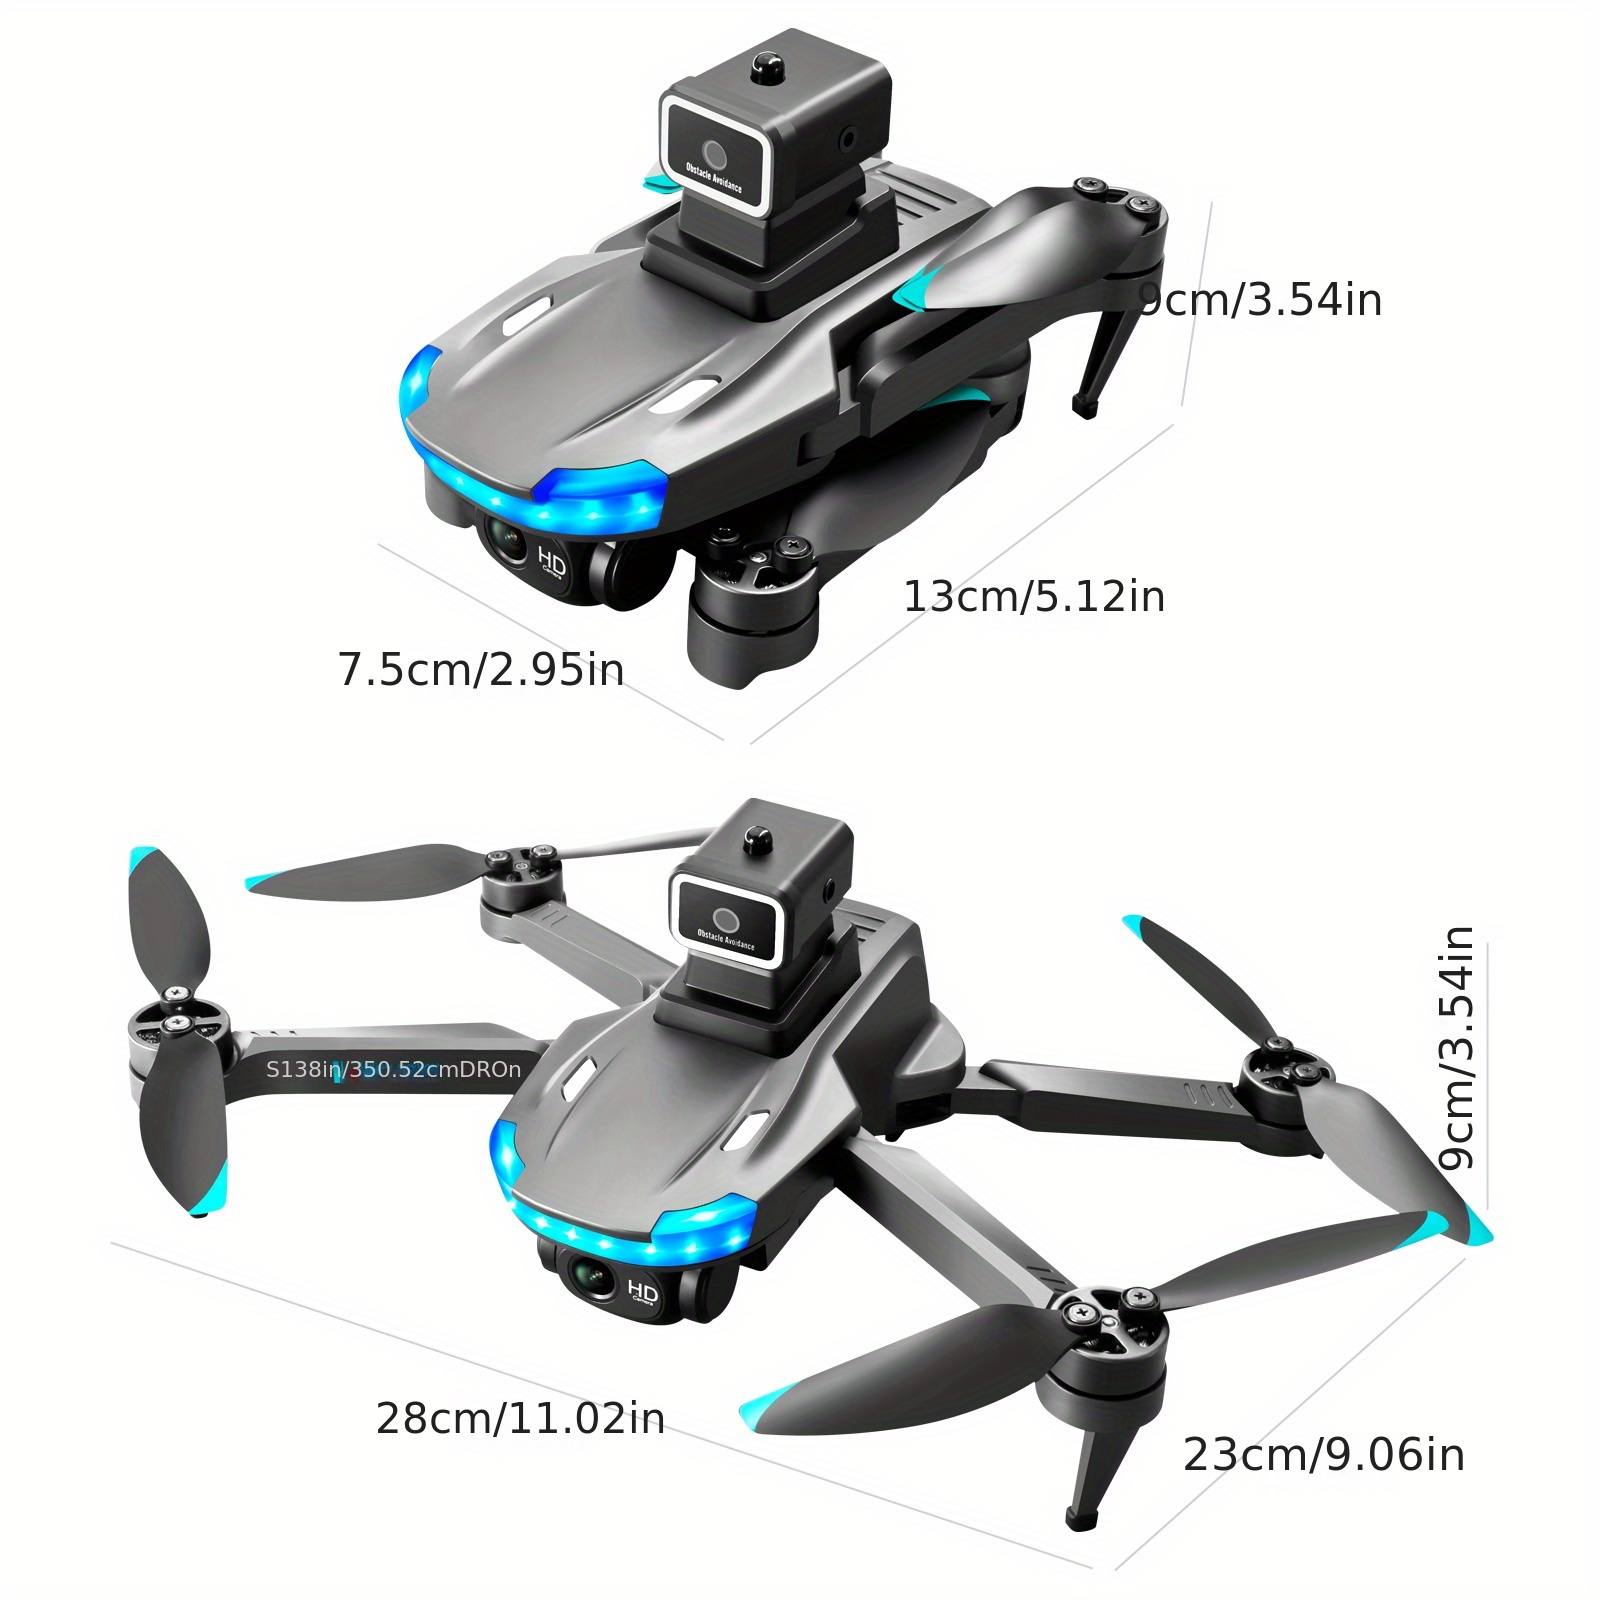 s138 brushless optical flow remote control drone with hd dual camera 1 3 batteries optical flow positioning esc camera brushless motor headless mode 360 intelligent obstacle avoidance wifi fpv details 8